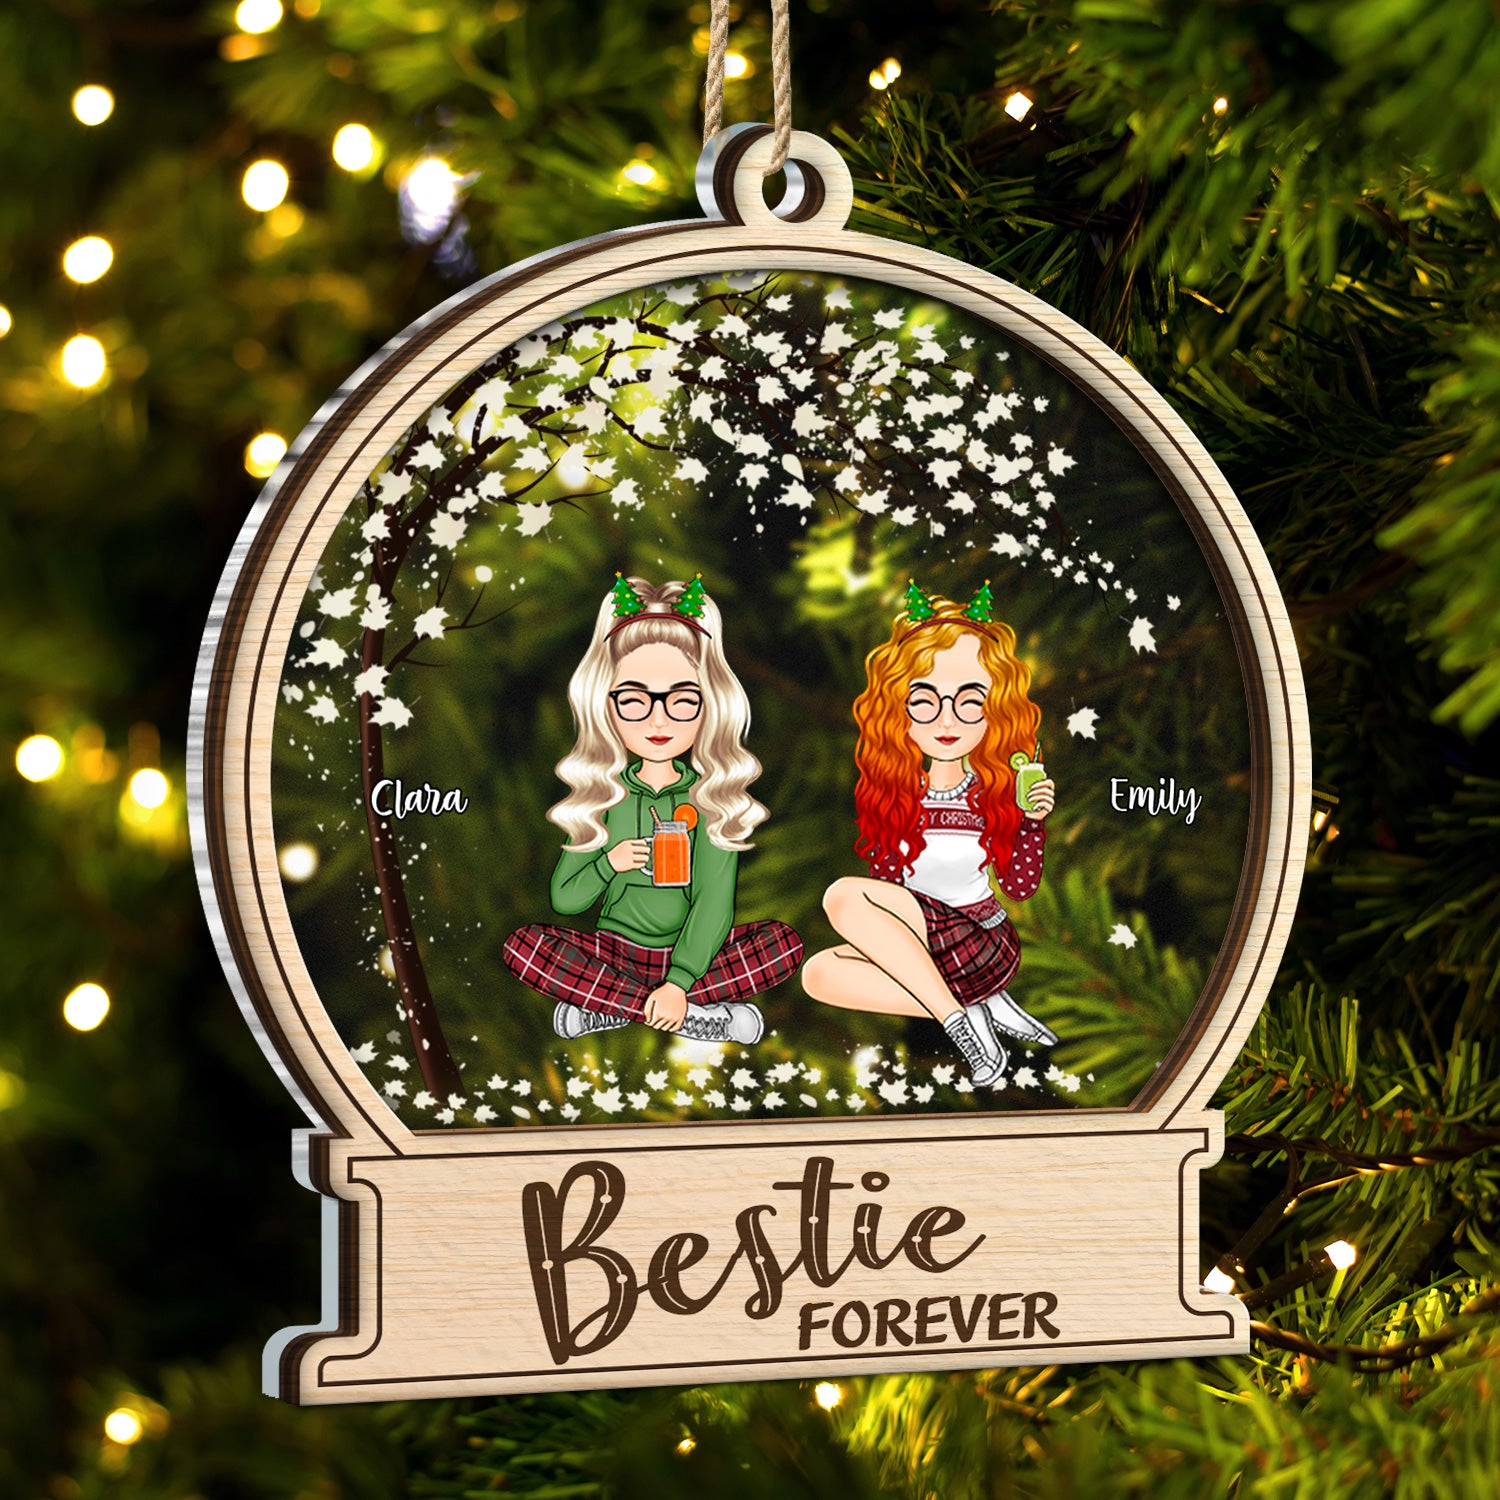 Besties Forever - Gift For Besties - Personalized 2-Layered Mix Ornament